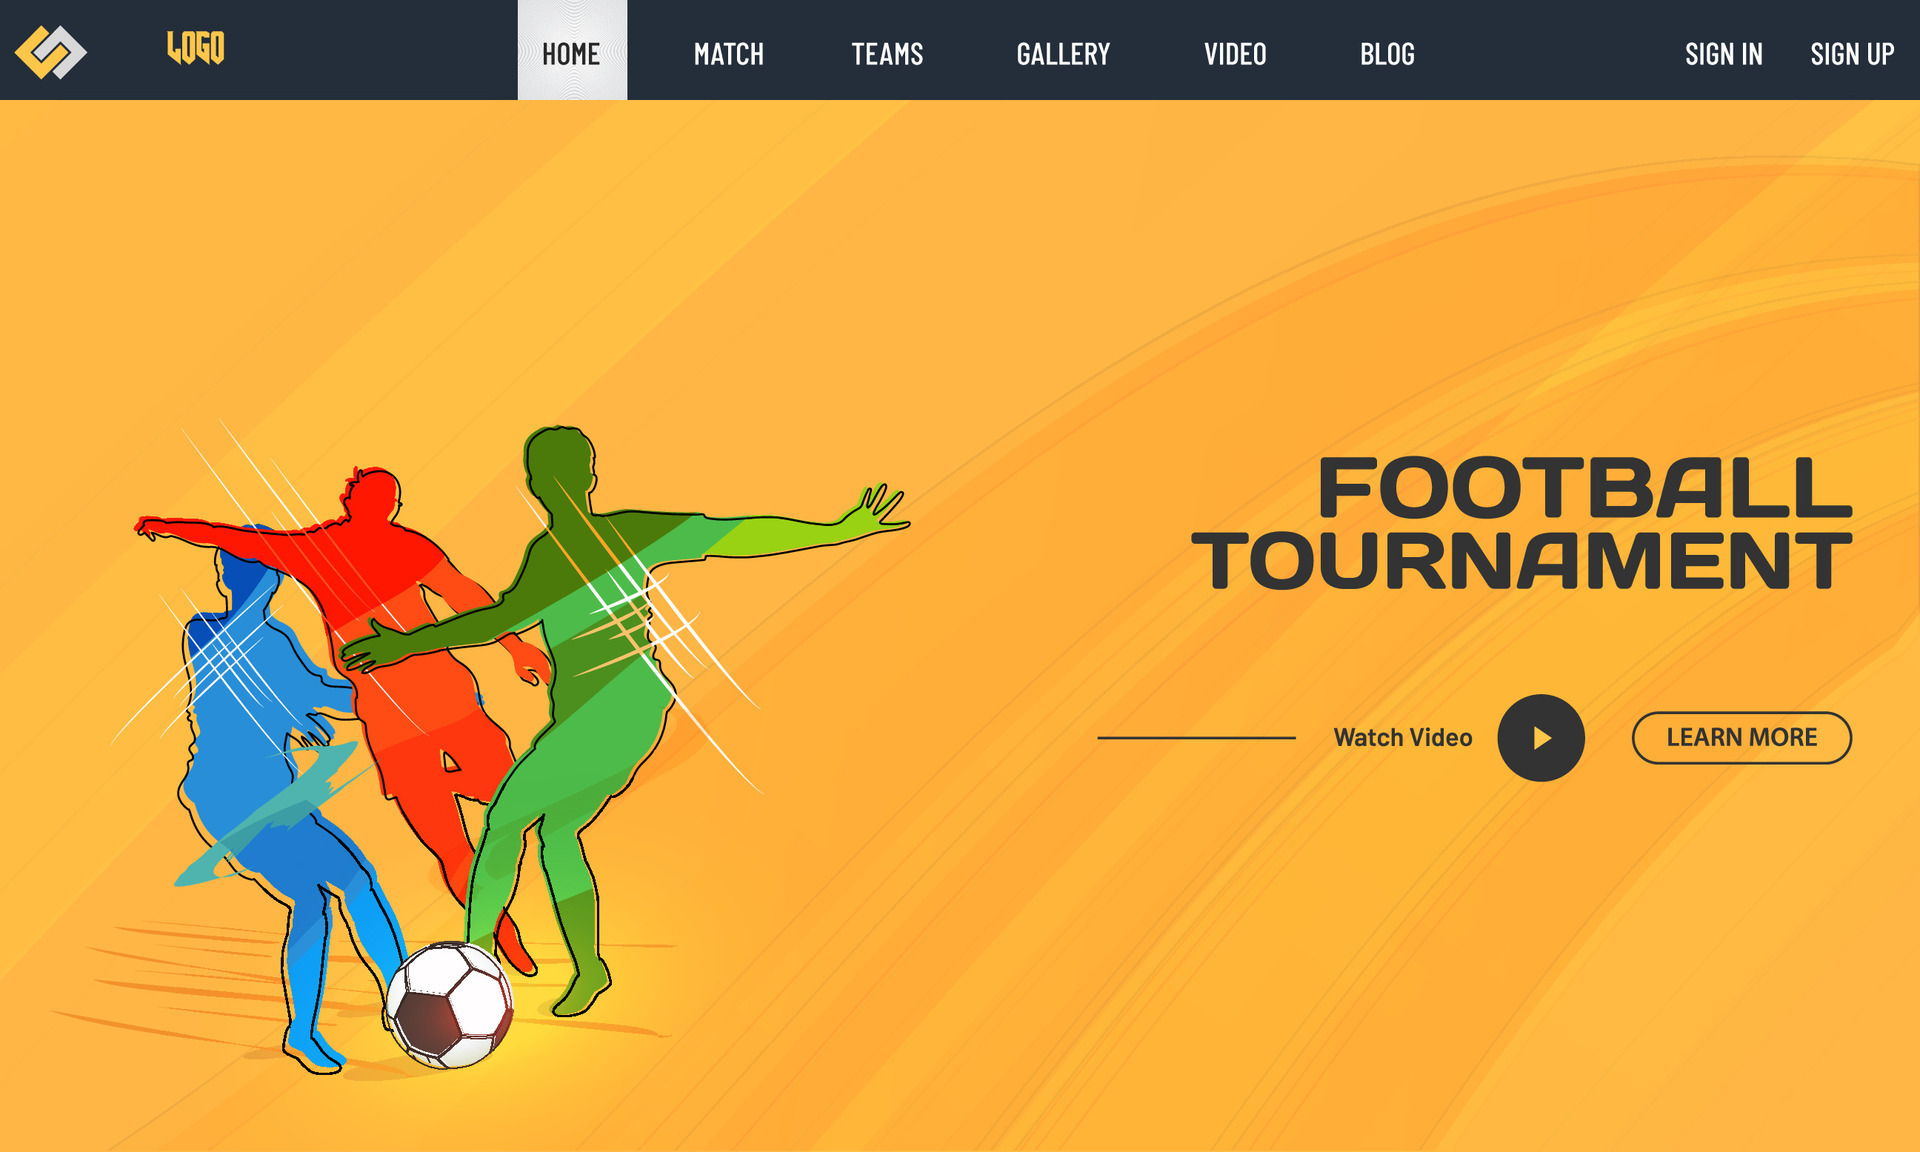 Watch Video Football Tournament Landing Page Design with Silhouette Soccer Player Playing Ball